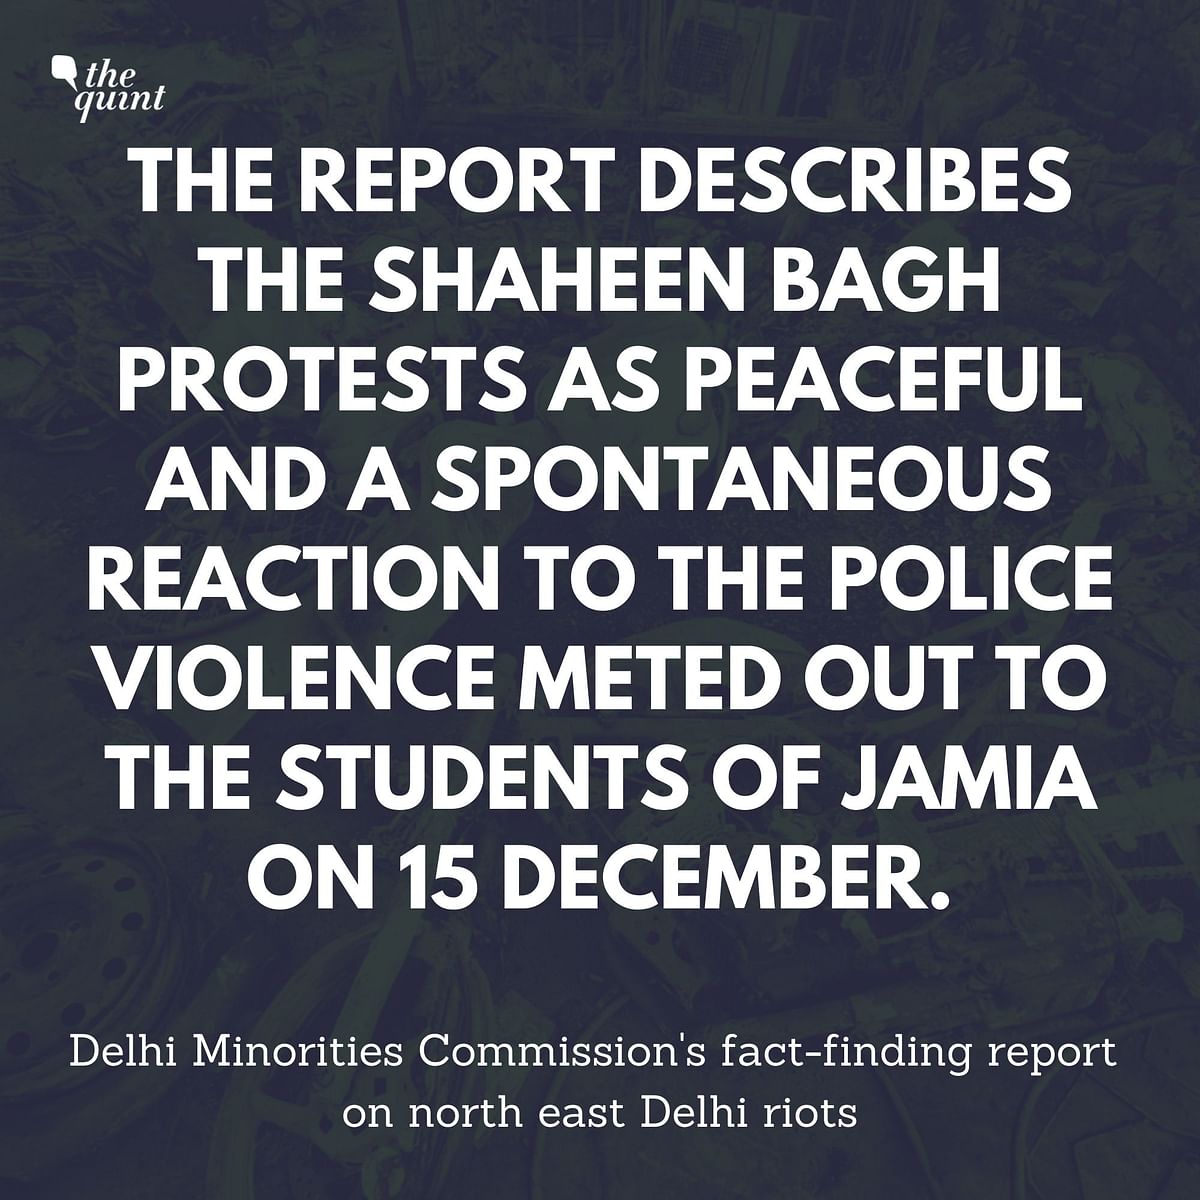 Delhi Minorities Commission’s fact-finding report on Delhi riots mentions Kapil Mishra’s speech among other details.